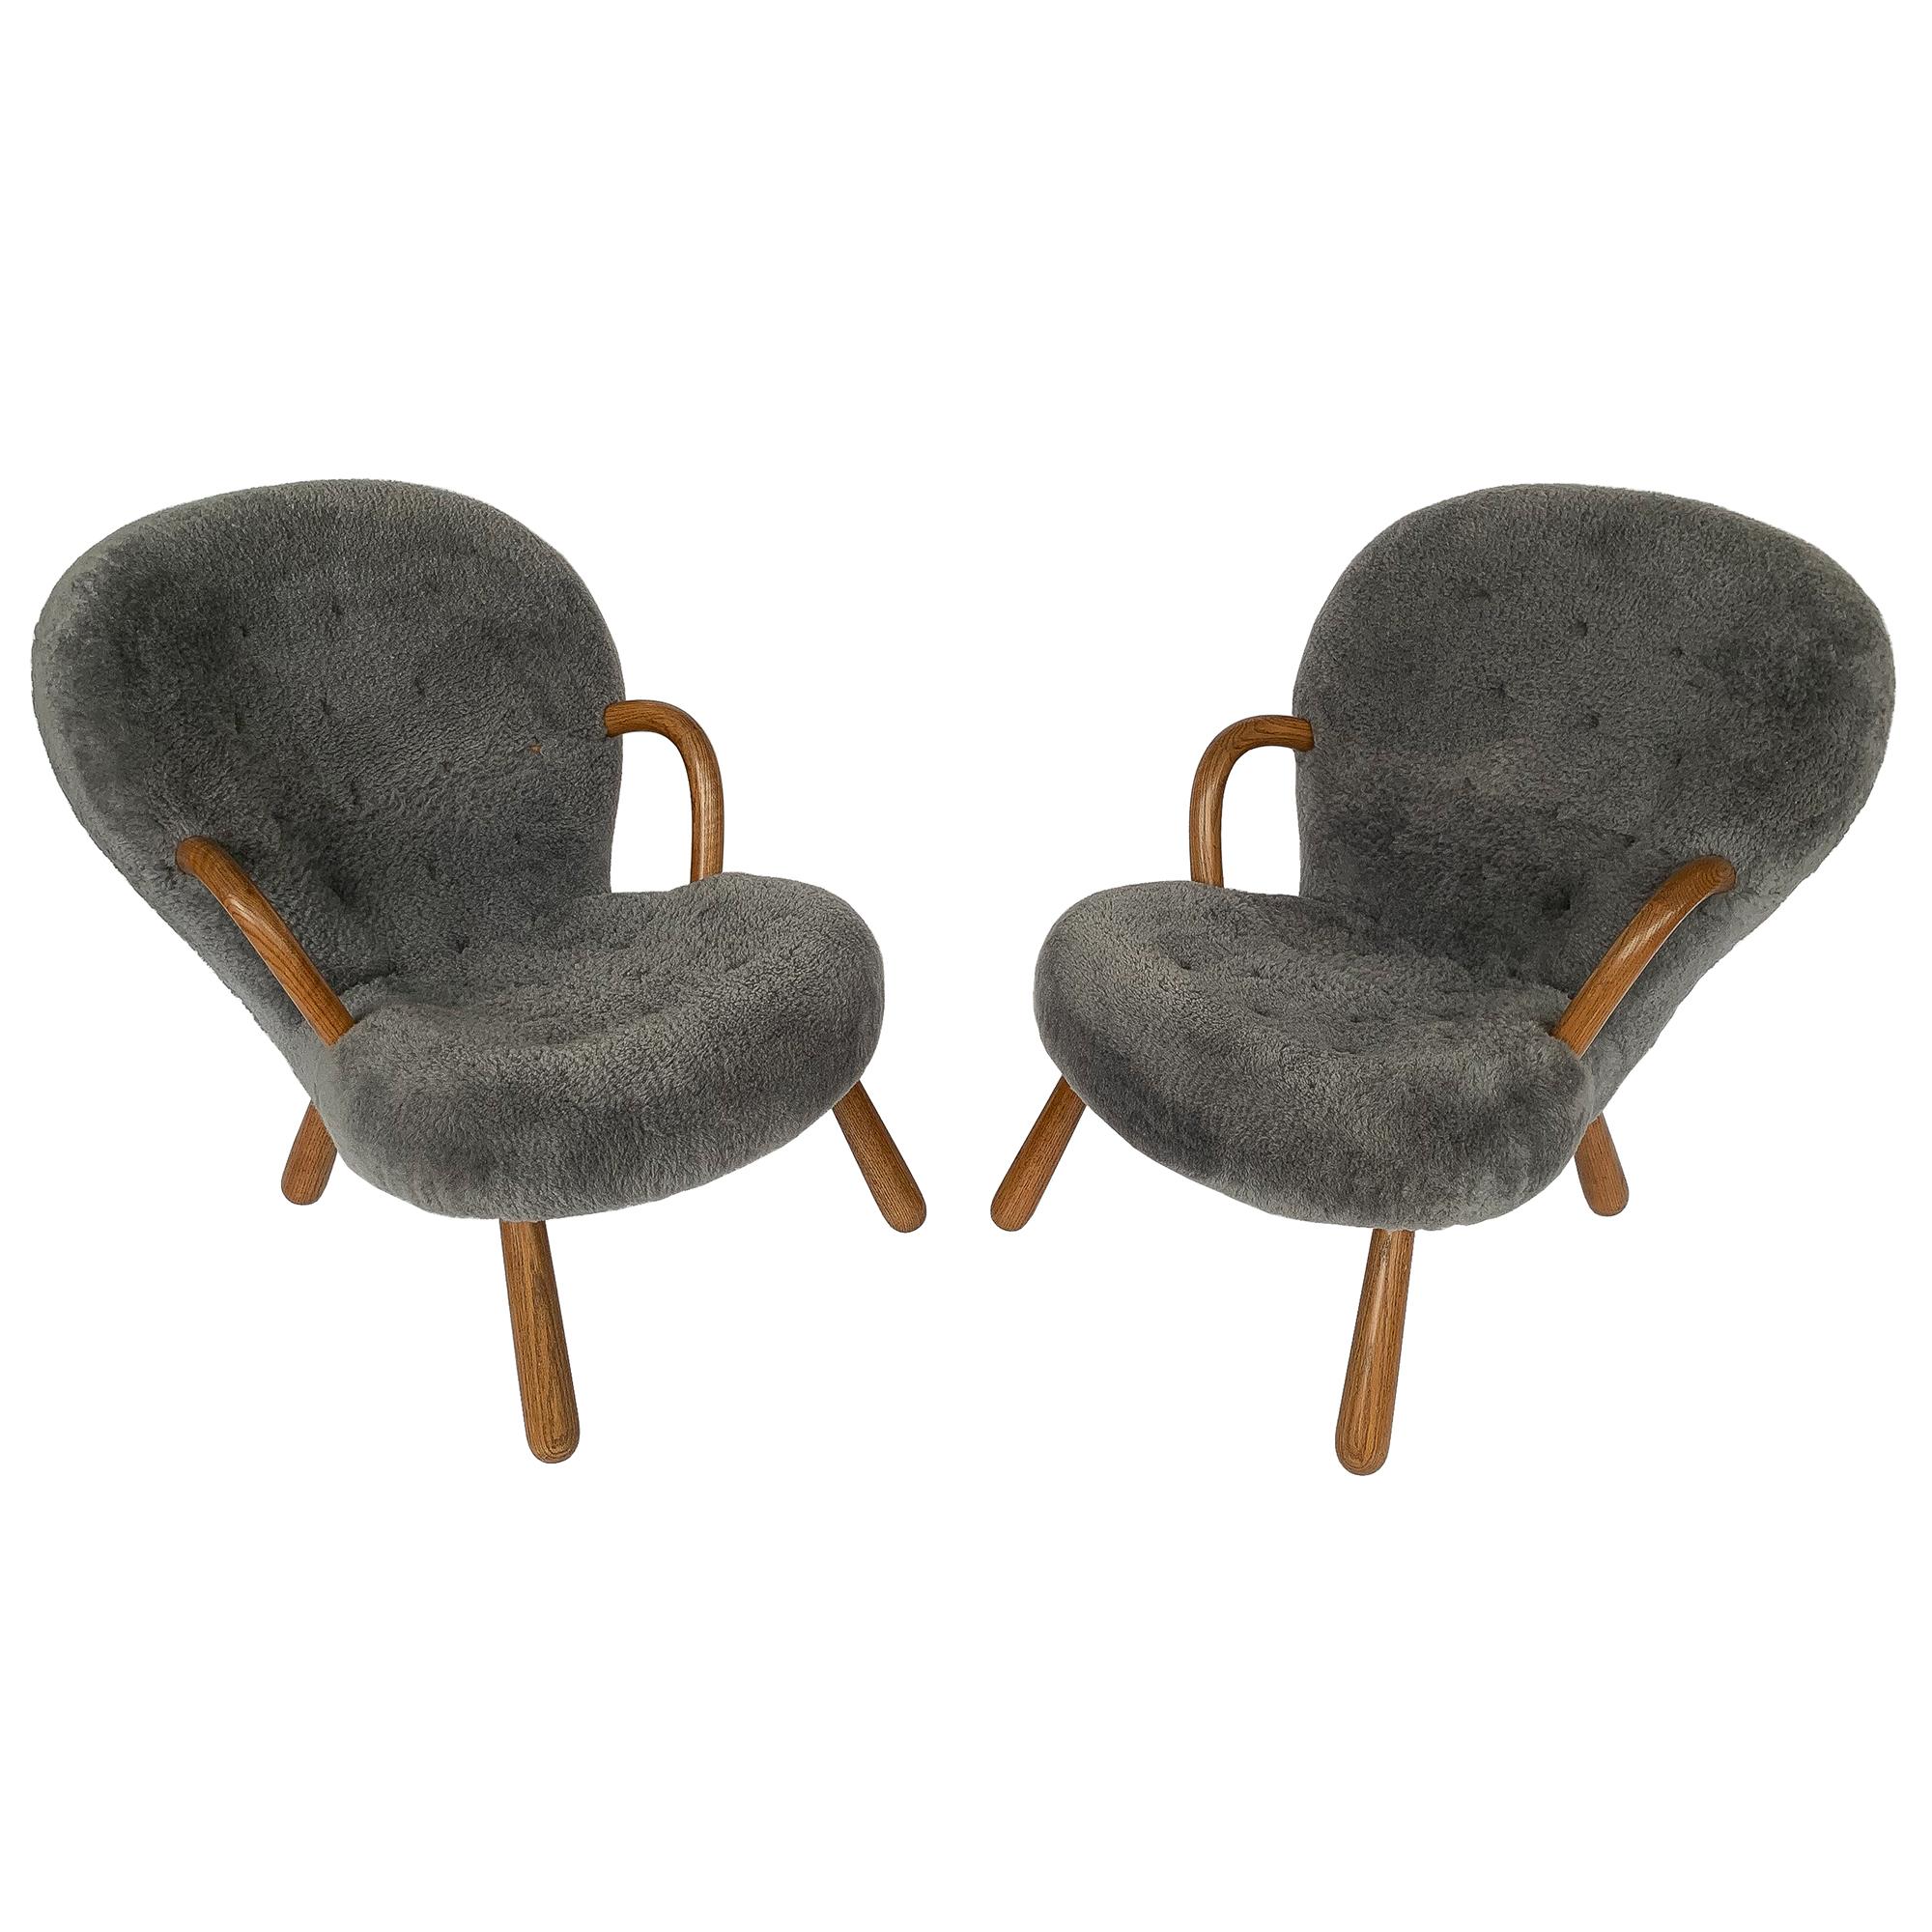 Pair of Philip Arctander Lounge Chairs for Paustian